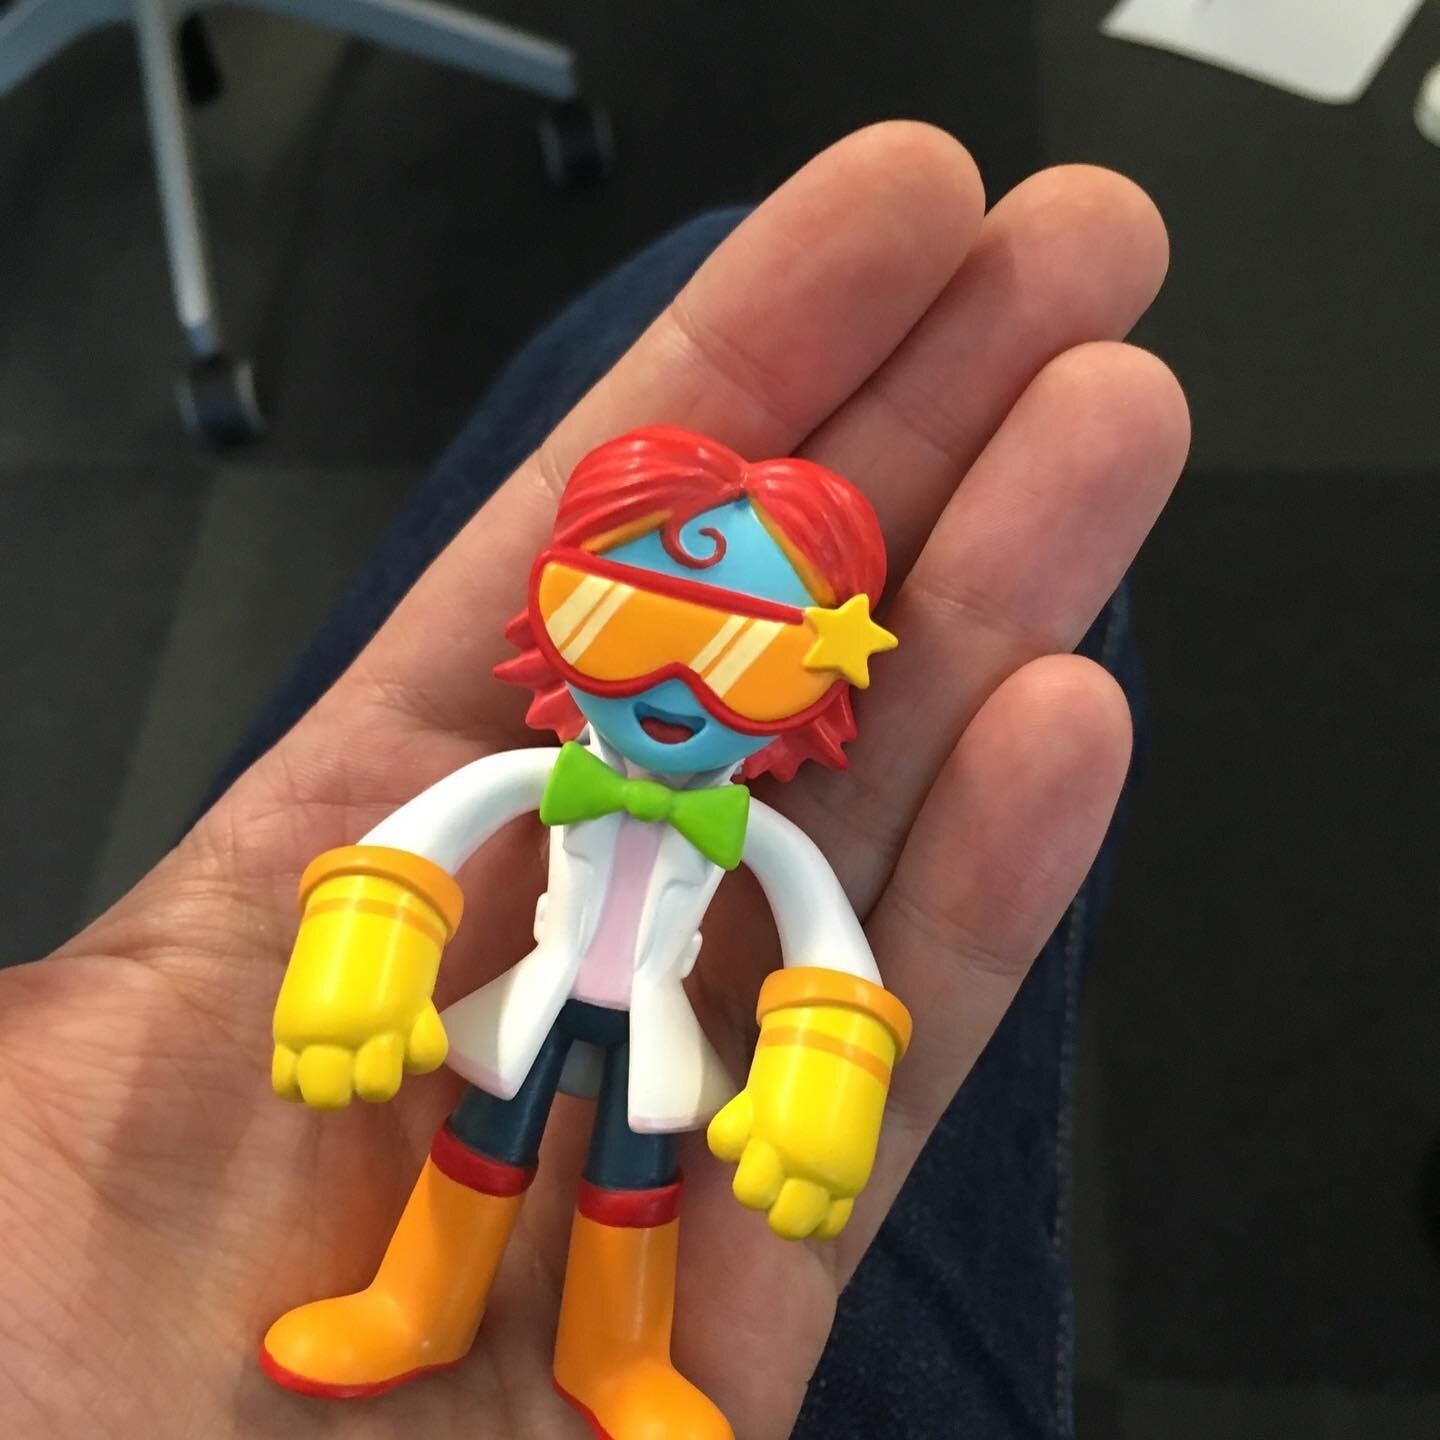 Loved the paint job on Polly from Osmo Coding Jam.